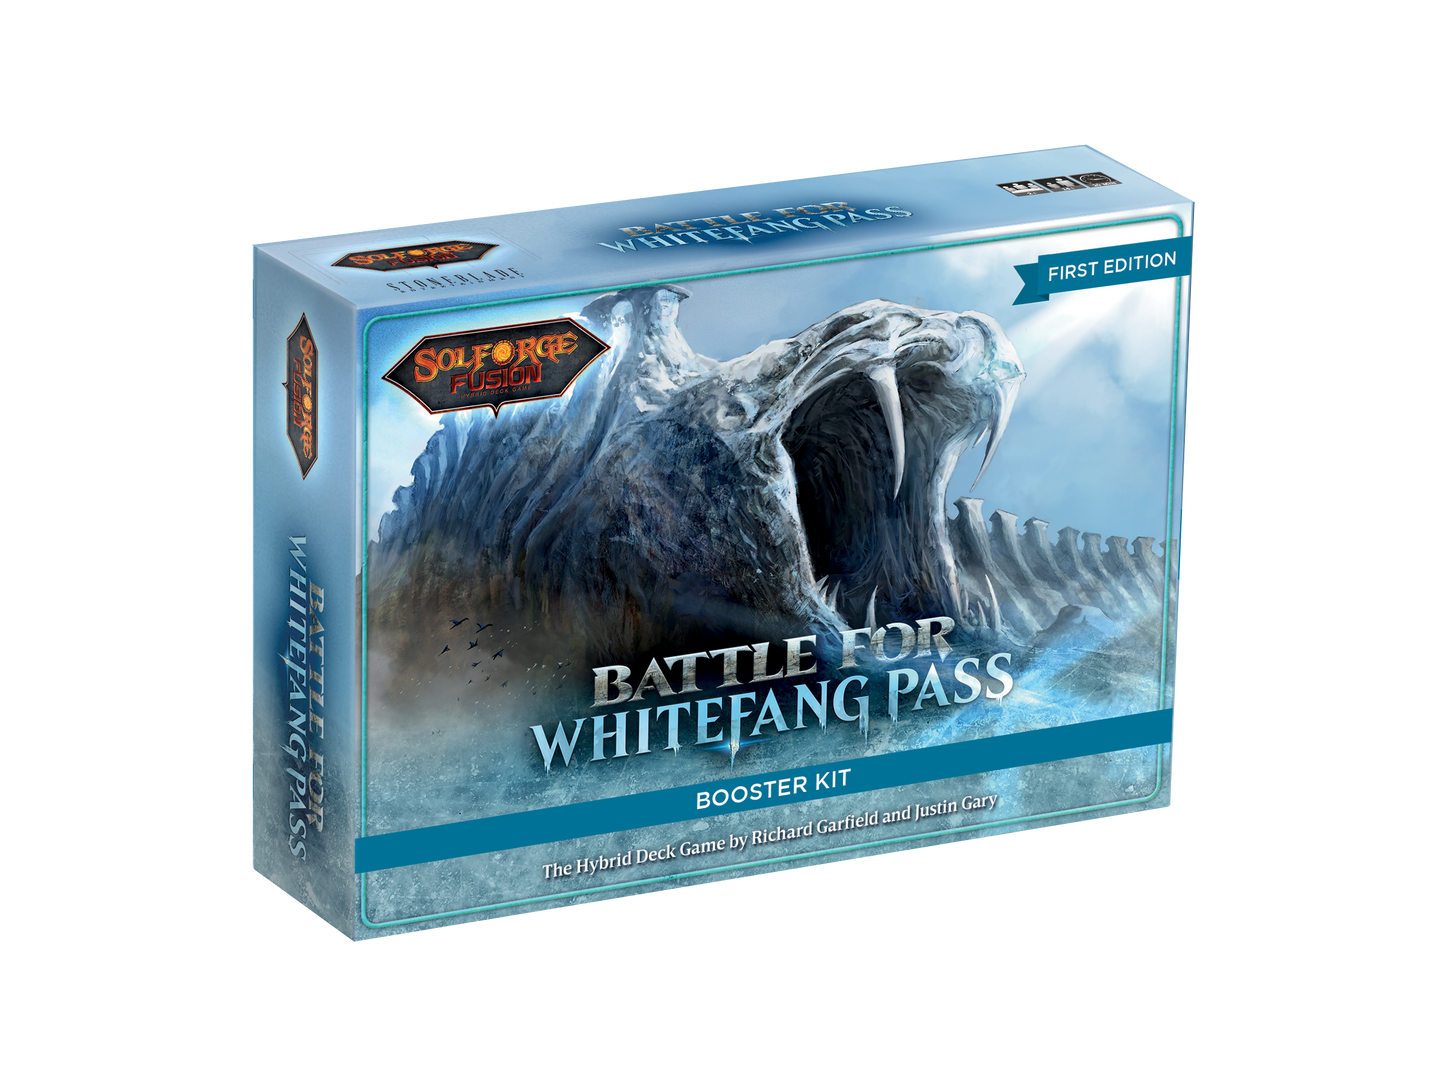 SolForge Fusion Whitefang Pass Booster Kit